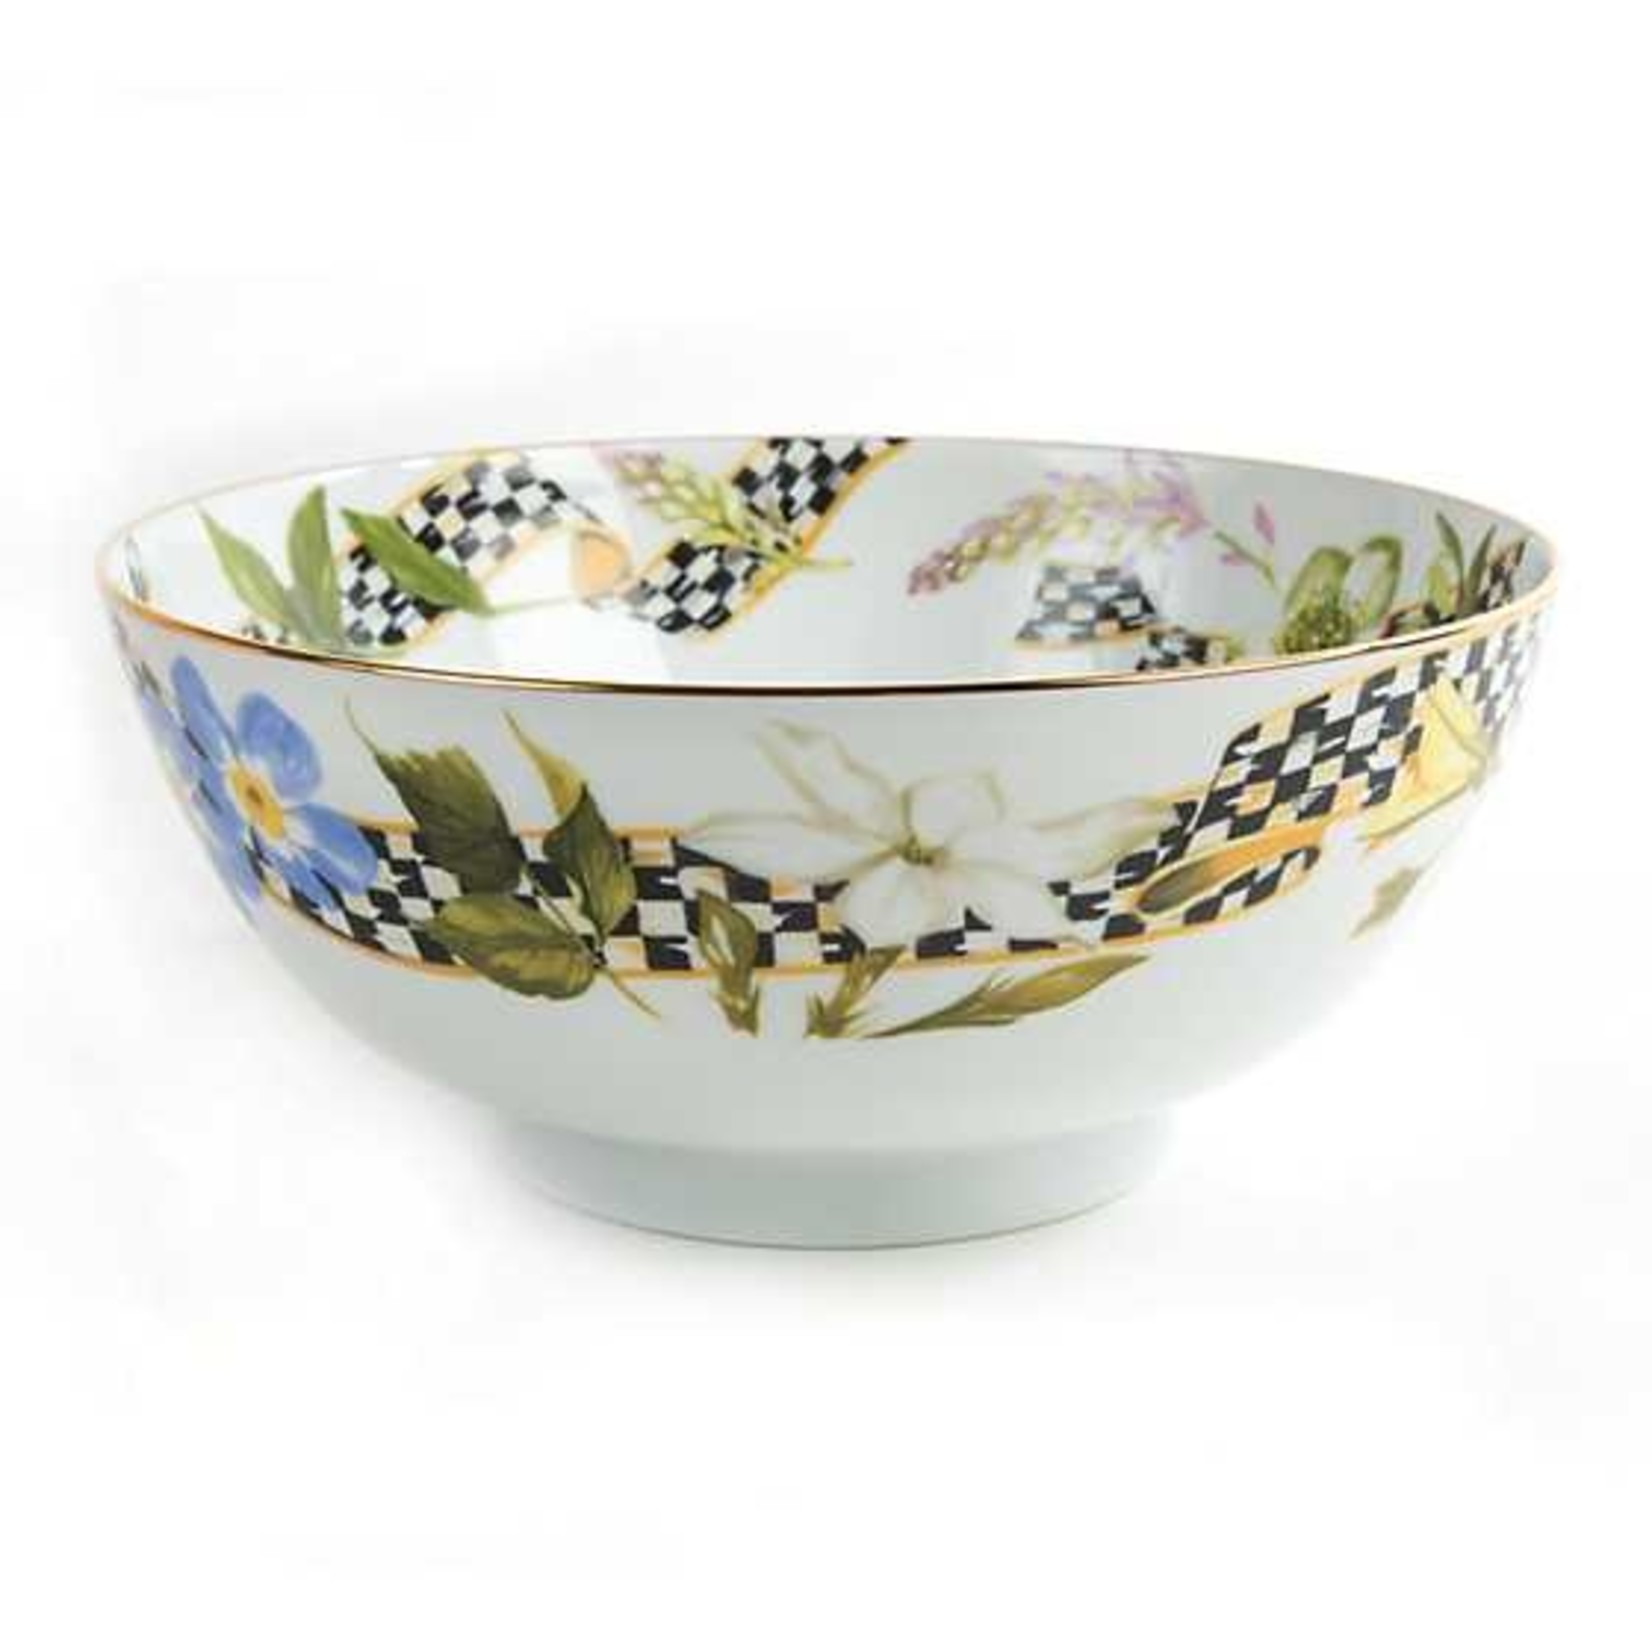 MacKenzie-Childs Thistle & Bee Serving Bowl